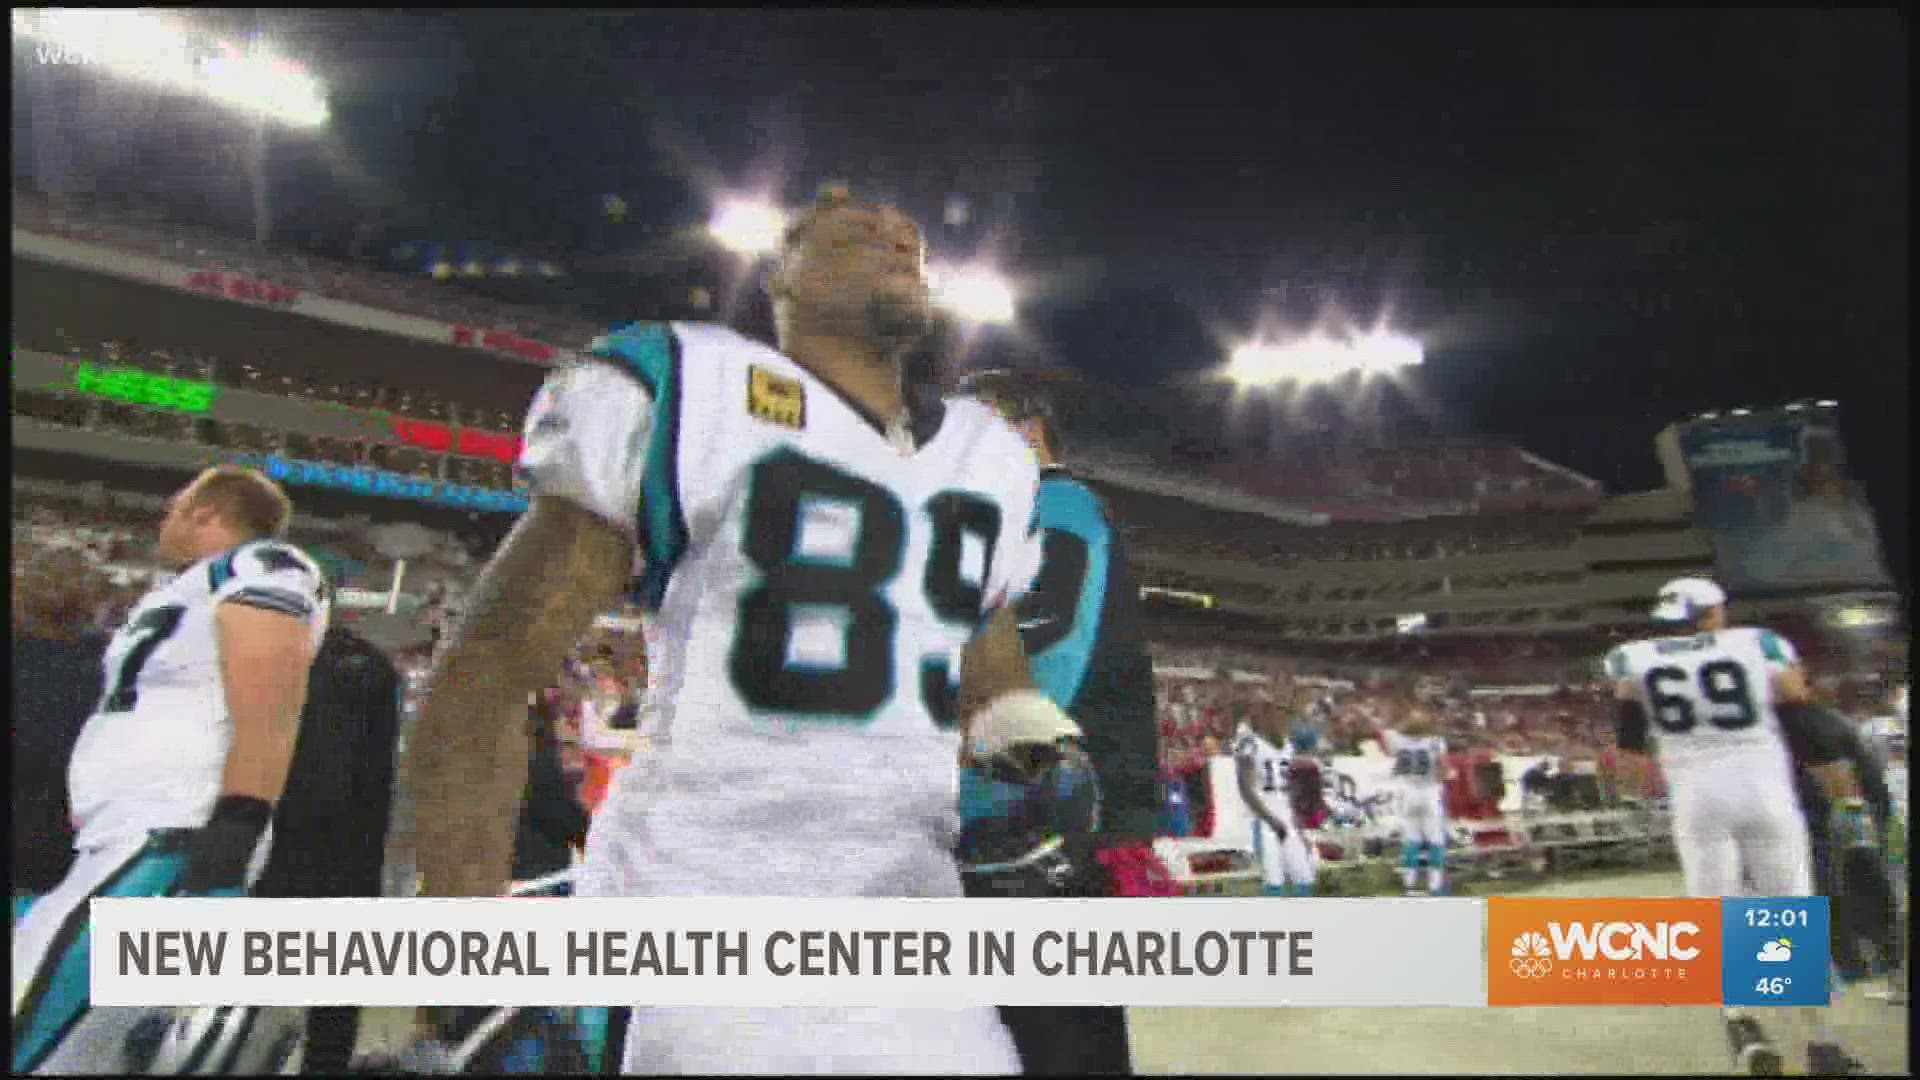 Former Carolina Panthers player Steve Smith is opening up a new mental health urgent center in Charlotte.